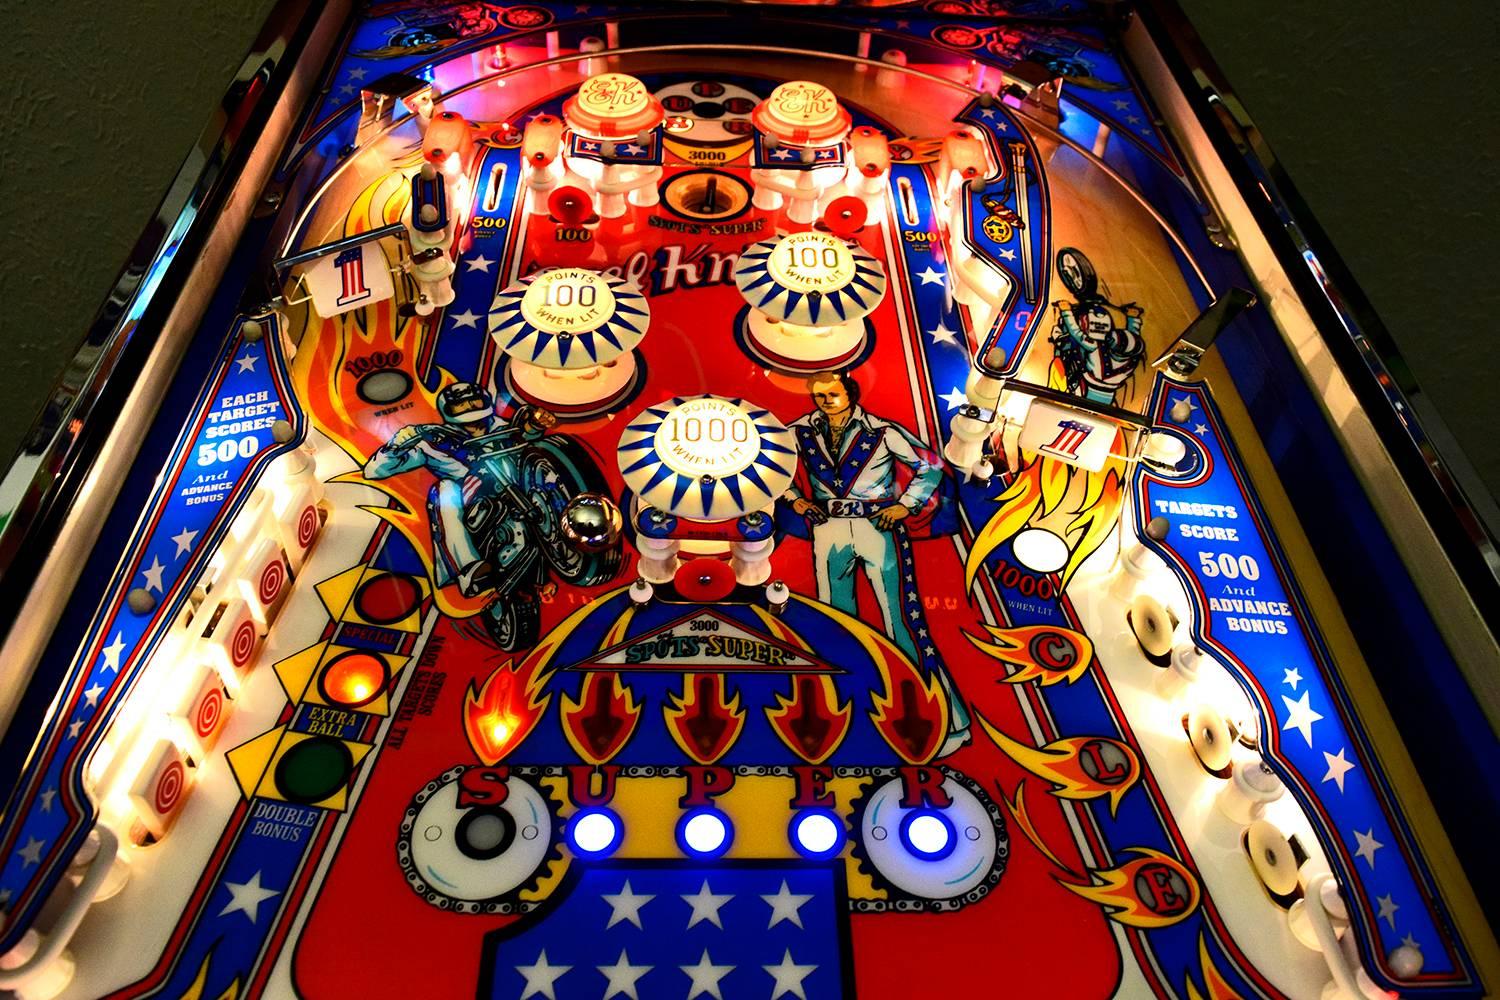 North American Bally Evel Knievel, Vintage Pinball Machine 1977, High-End Restoration For Sale